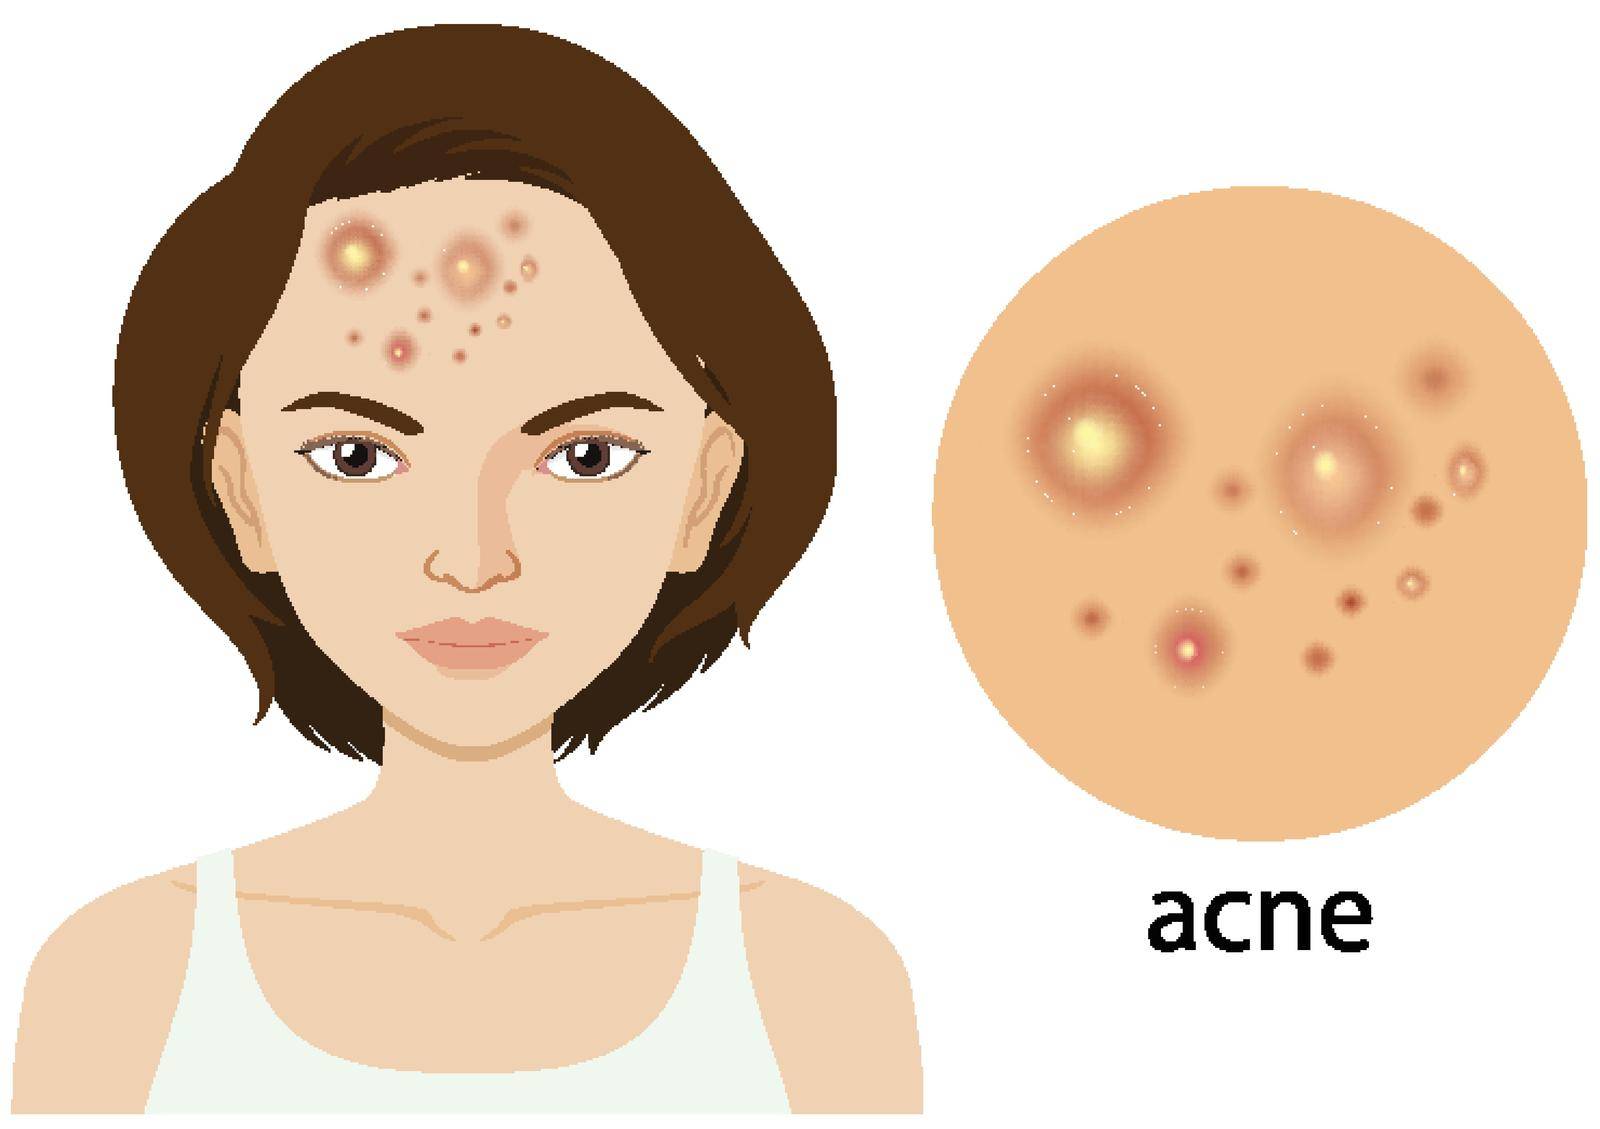 Diagram showing woman with acne problem illustration